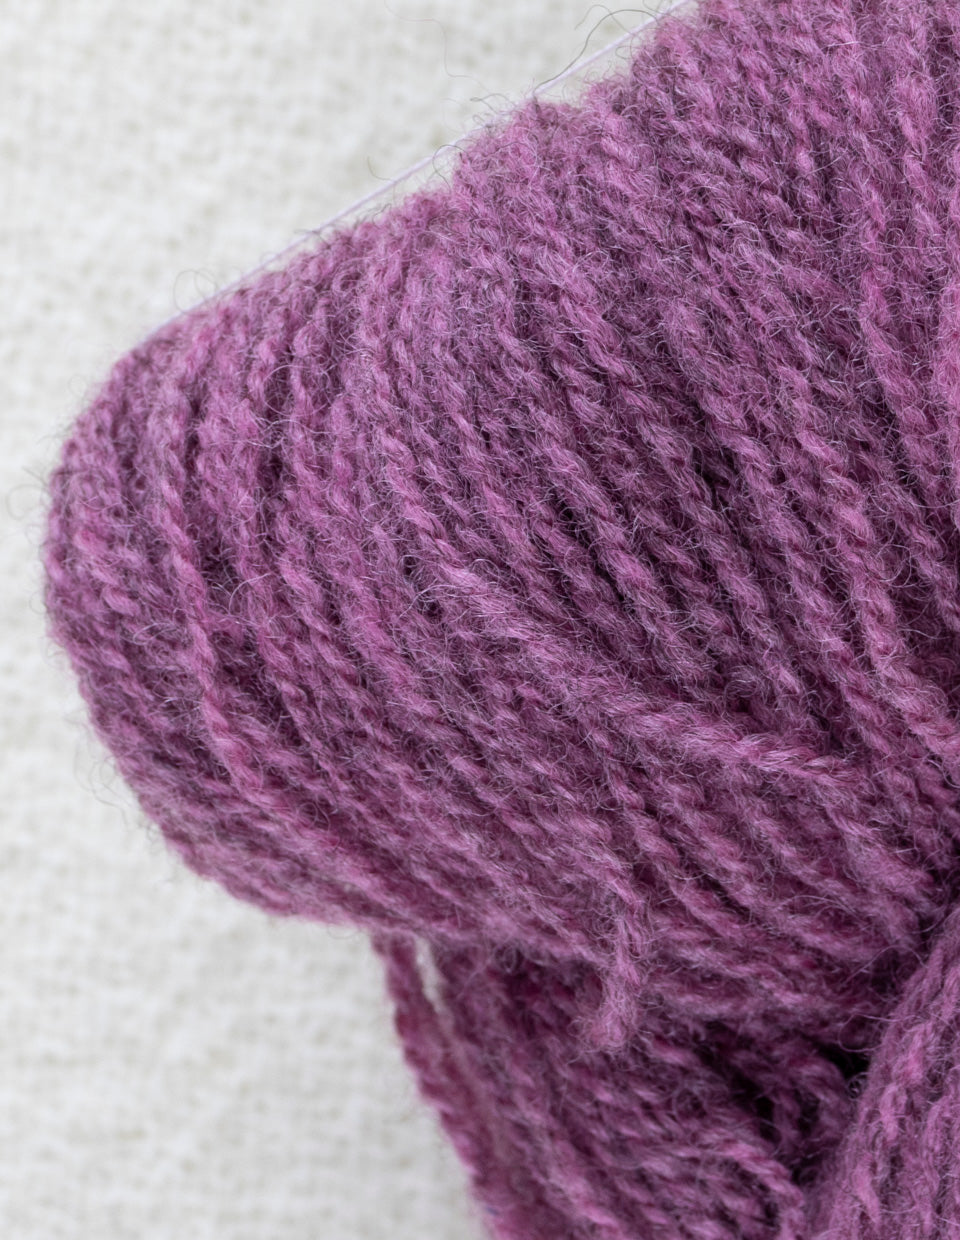 Røsslyng 3 ply, 50/100g, (Heather)